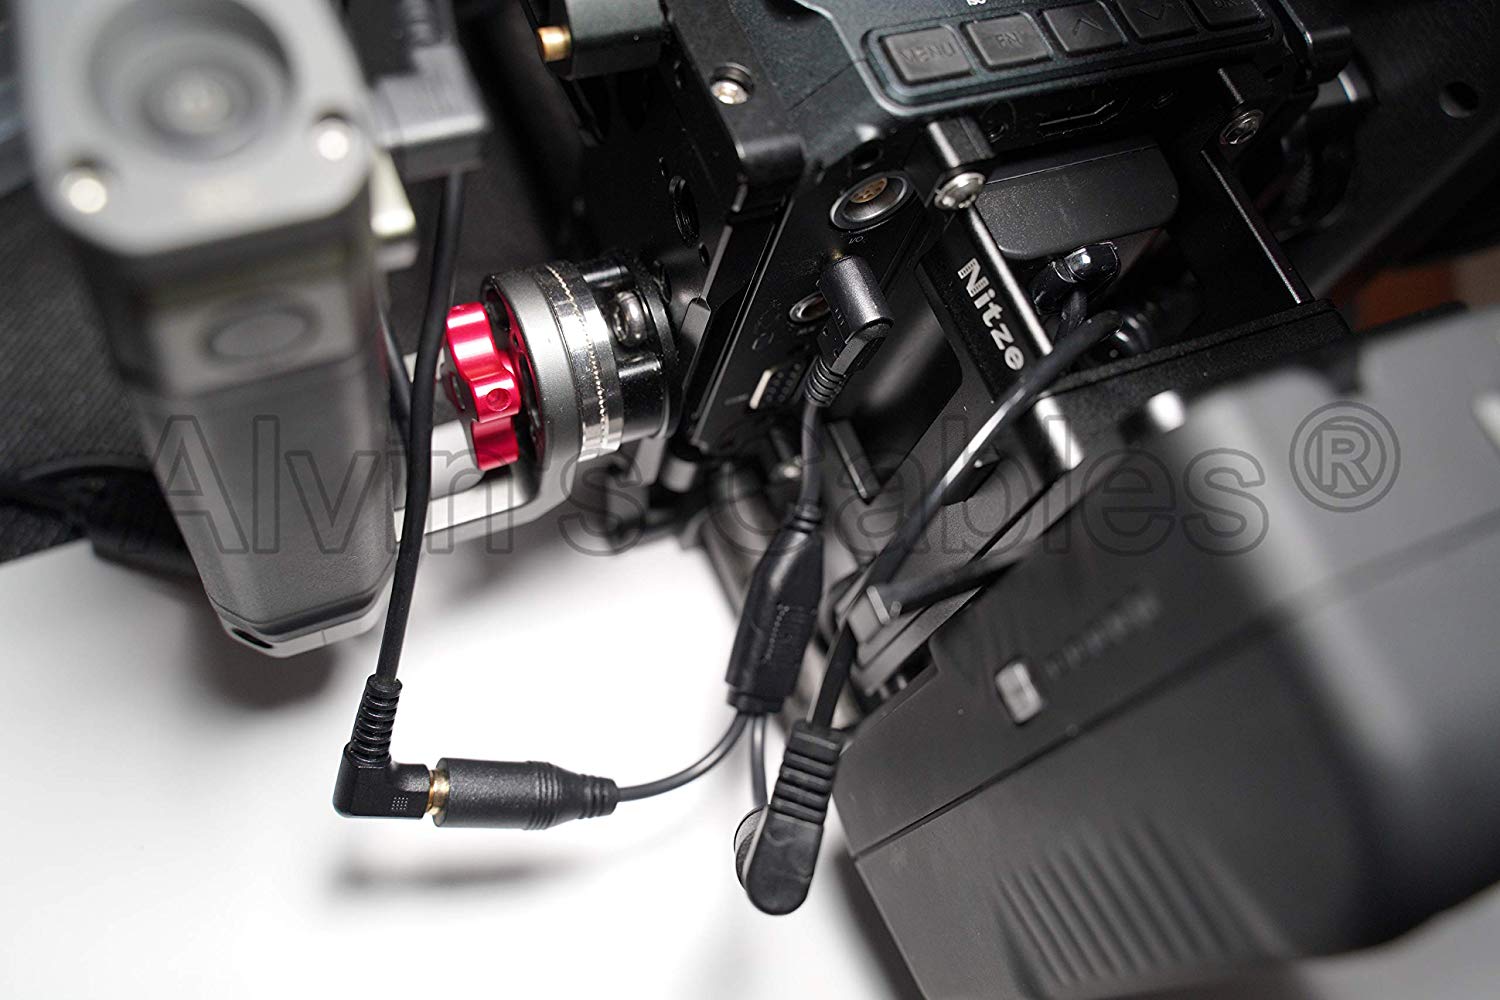 Alvin's Cables Z Cam E2 LANC Splitter Cable for BM5 and Sony LANC Protocol Side Handles